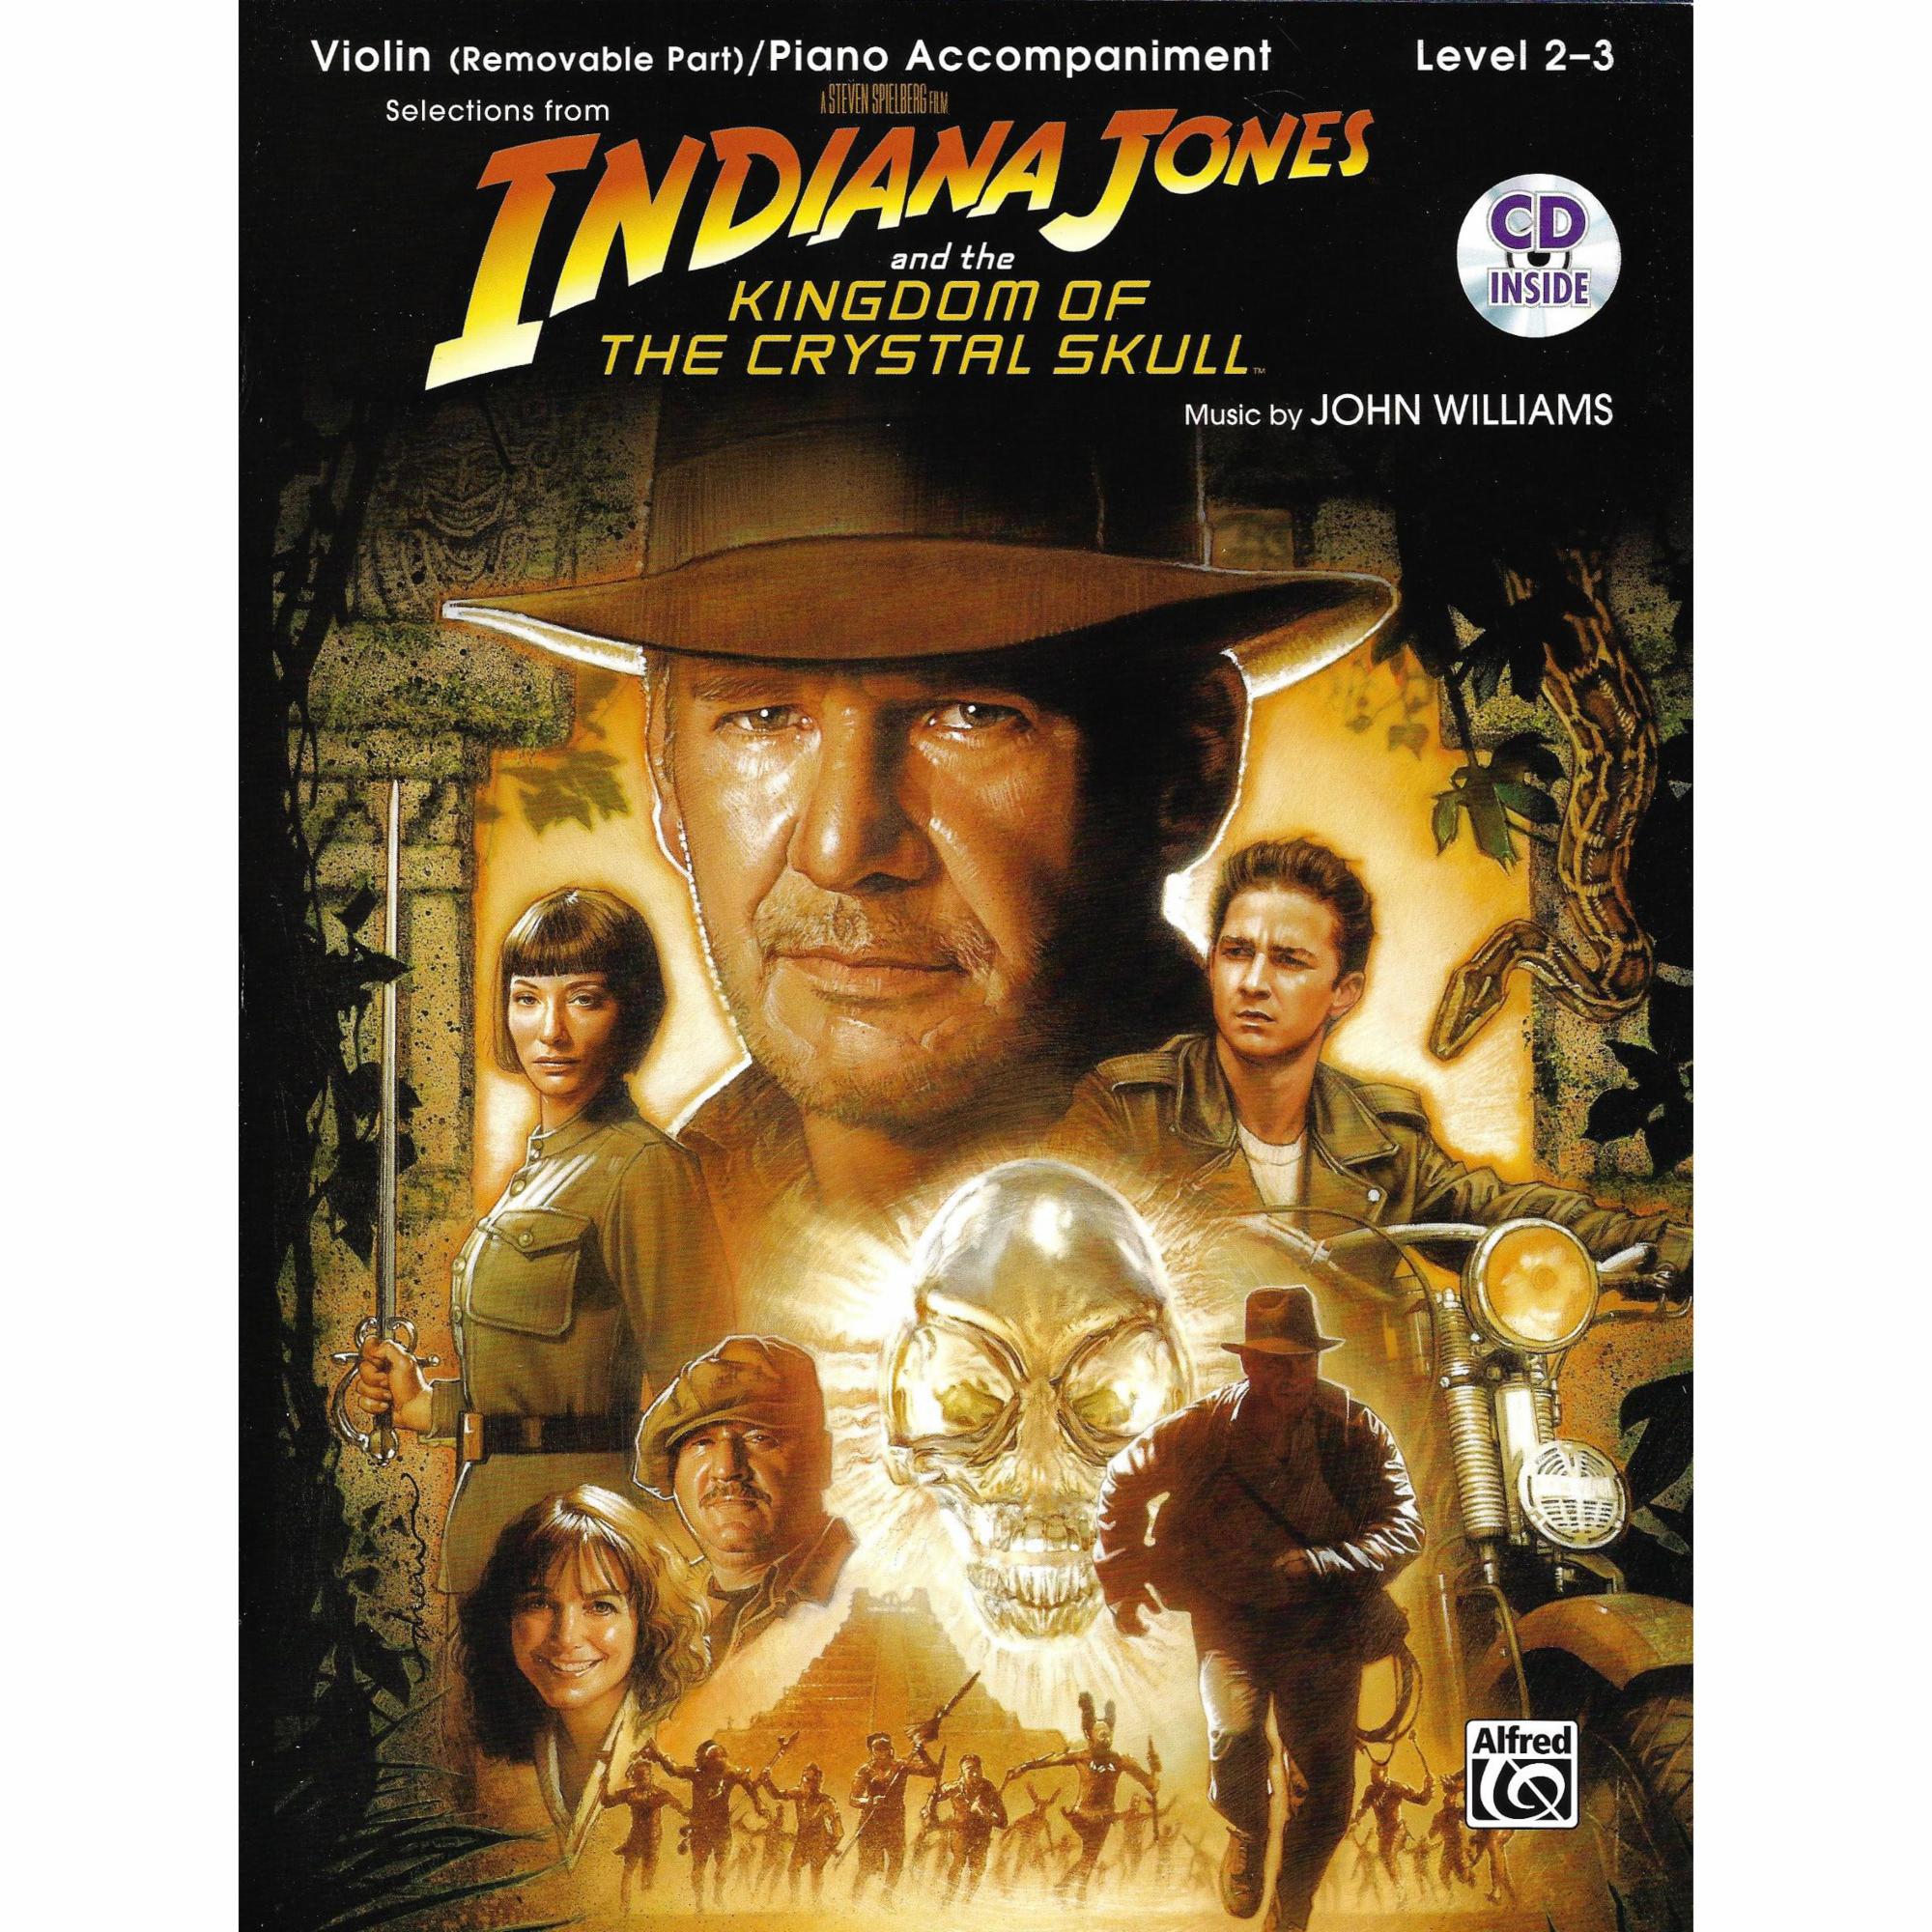 Indiana Jones and the Kingdom of the Crystal Skull for Violin, Viola, or Cello